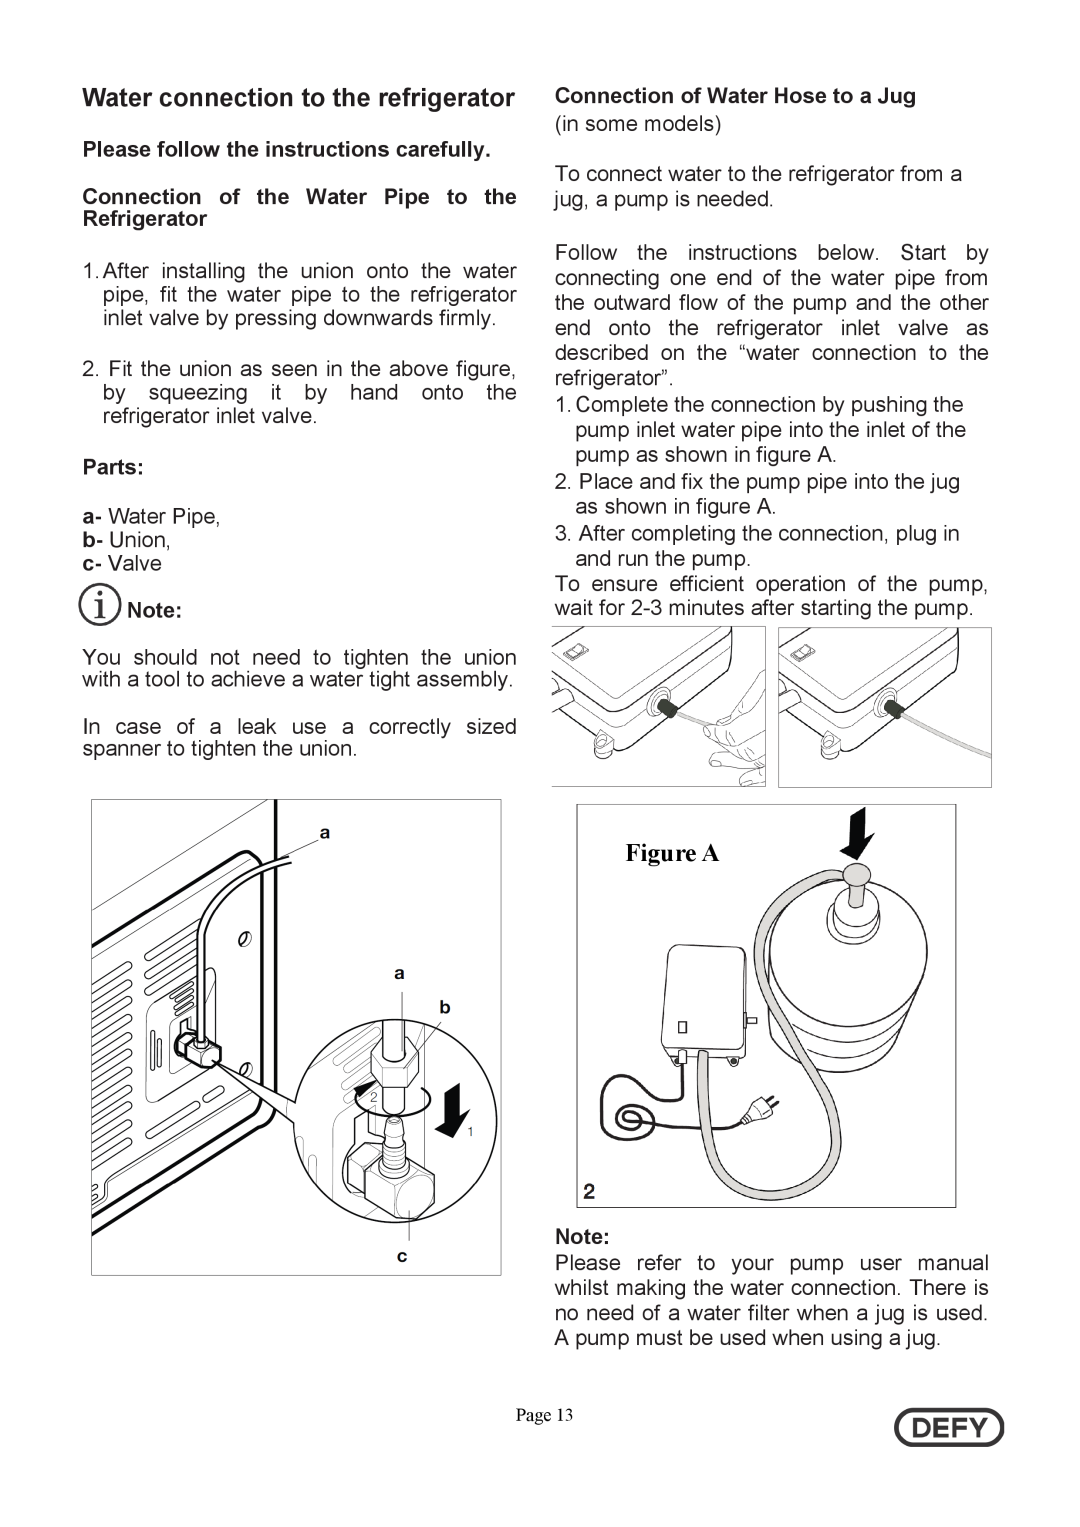 Defy Appliances 5718140000/AA Water connection to the refrigerator, Please follow the instructions carefully, Parts 